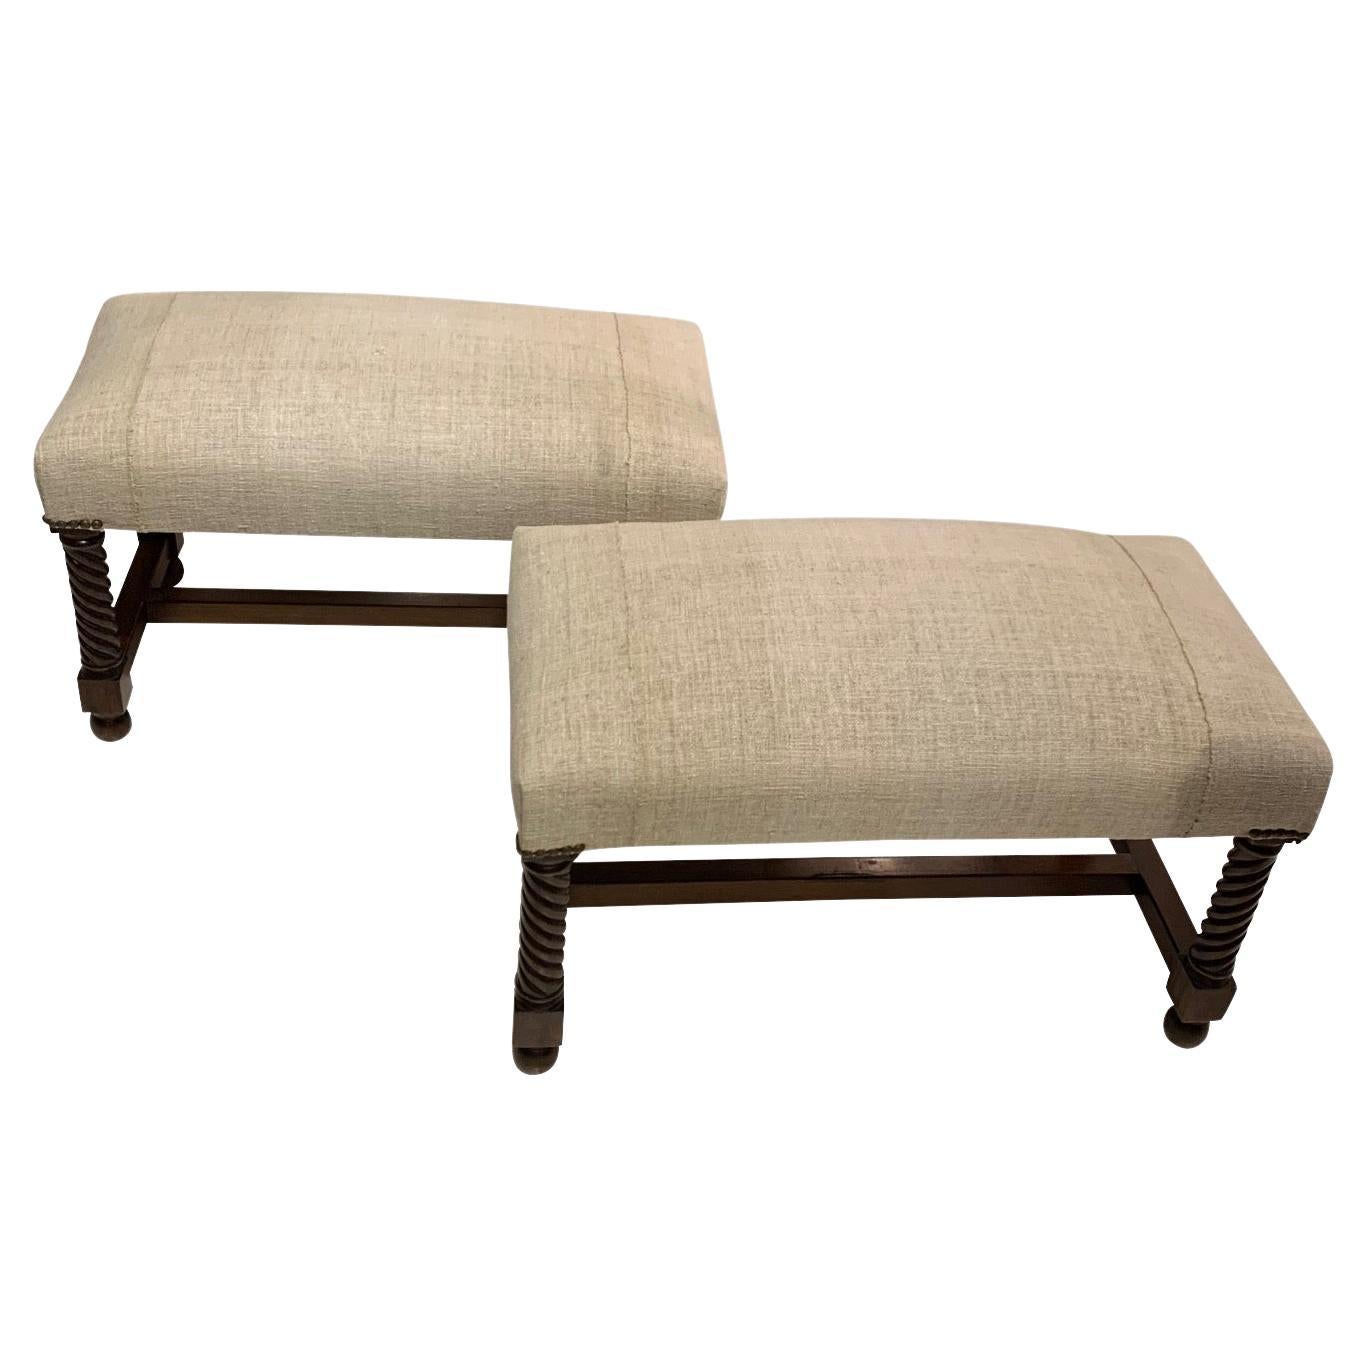 1940's Spanish spool leg bench.
Recently recovered in handspun vintage Belgian linen.
Two available and sold individually.